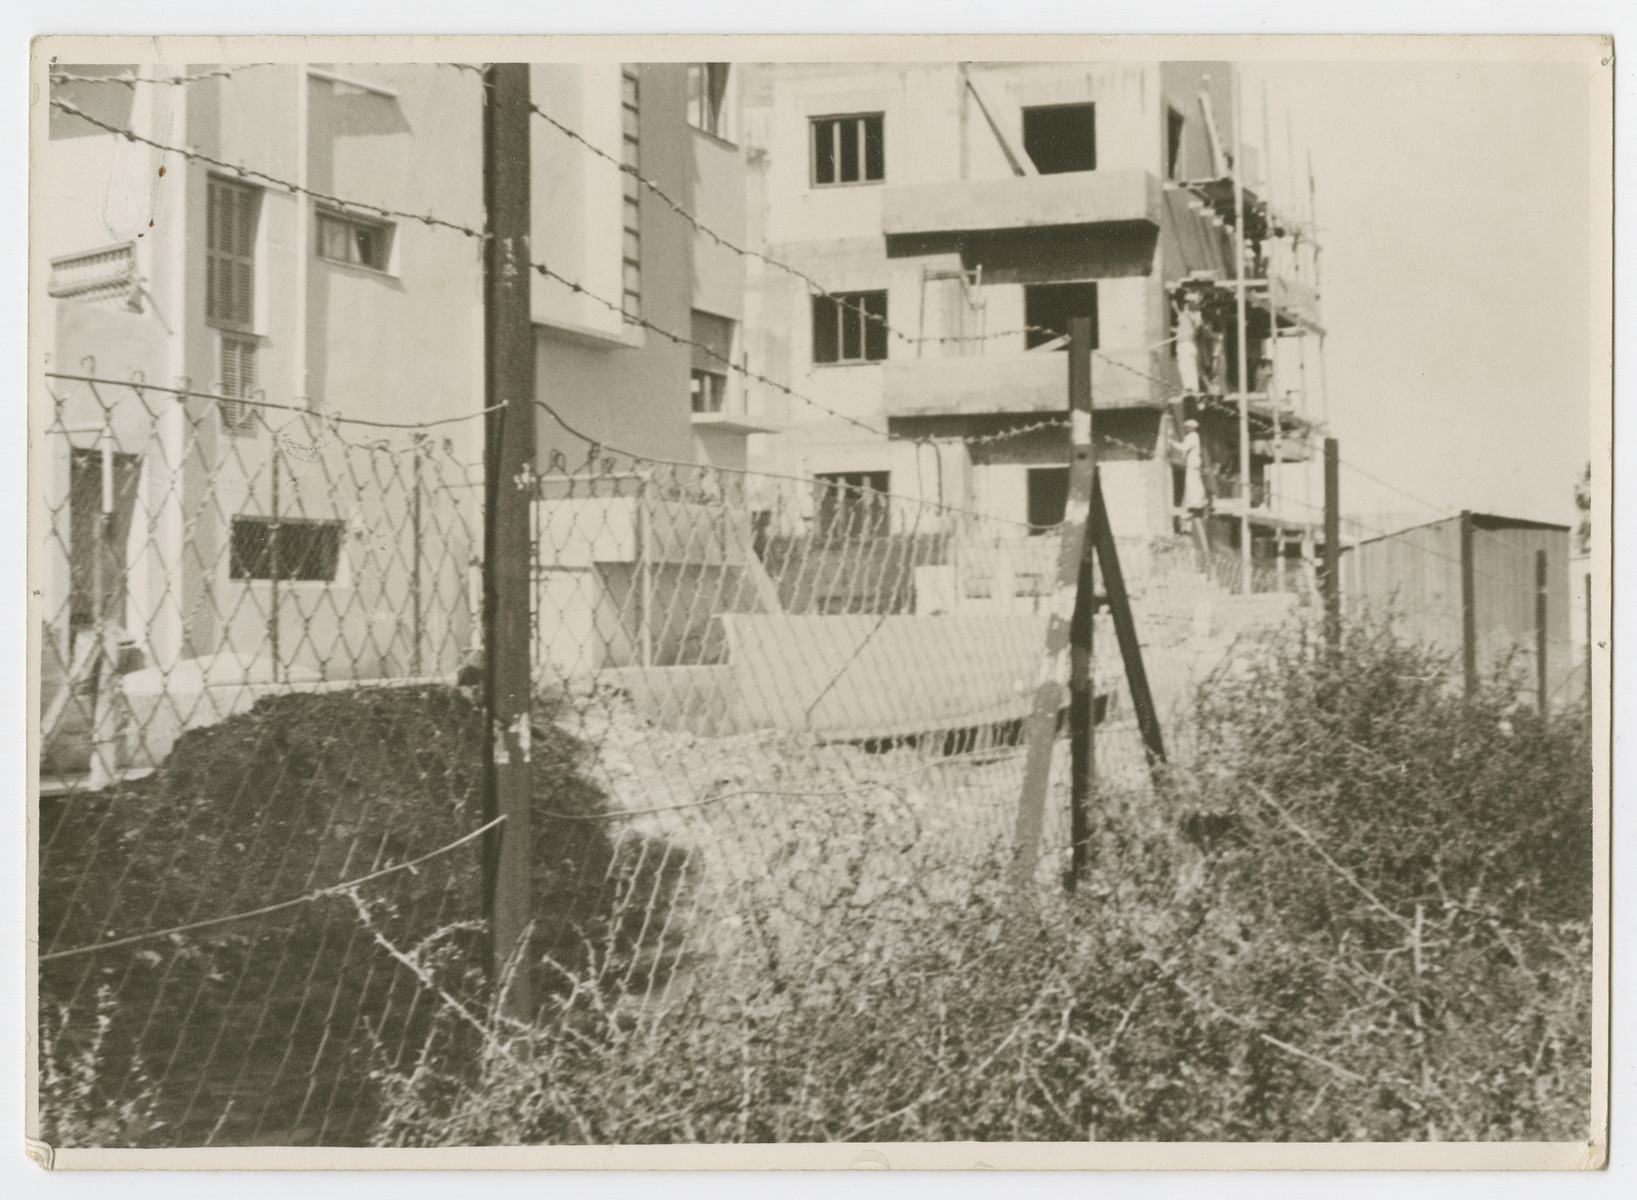 View of an apartment house in Sarona, which was created as a colony of German Knight Templars in 1871. 

Photograph is used on page 188 of Robert Gessner's "Some of My Best Friends are Jews." The pencil inscription on the back of the photograph reads, "Nazi protector?  Ag Jews."